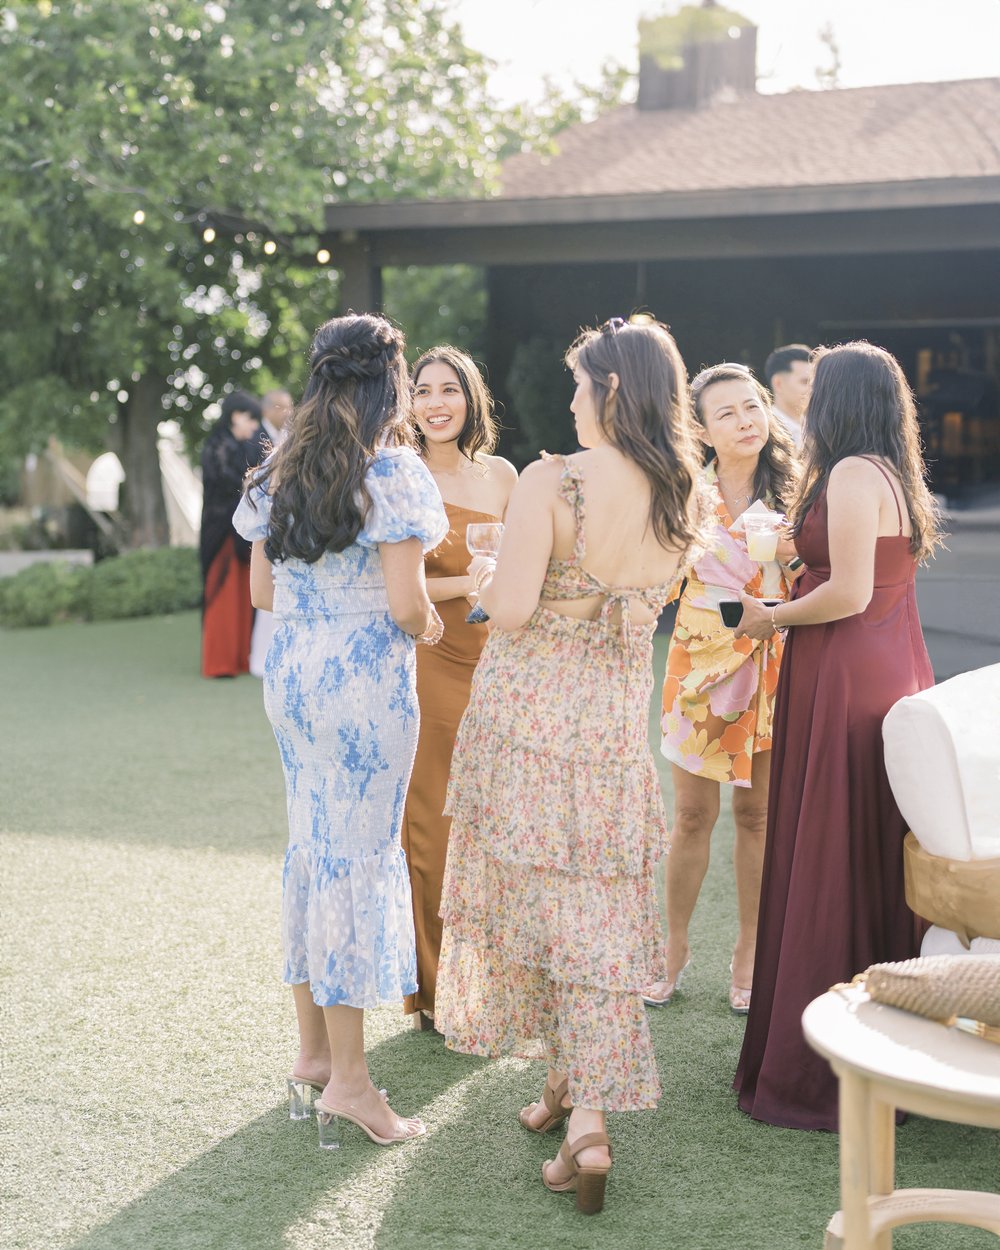 guests-mingling-at-cocktail-hour.jpg